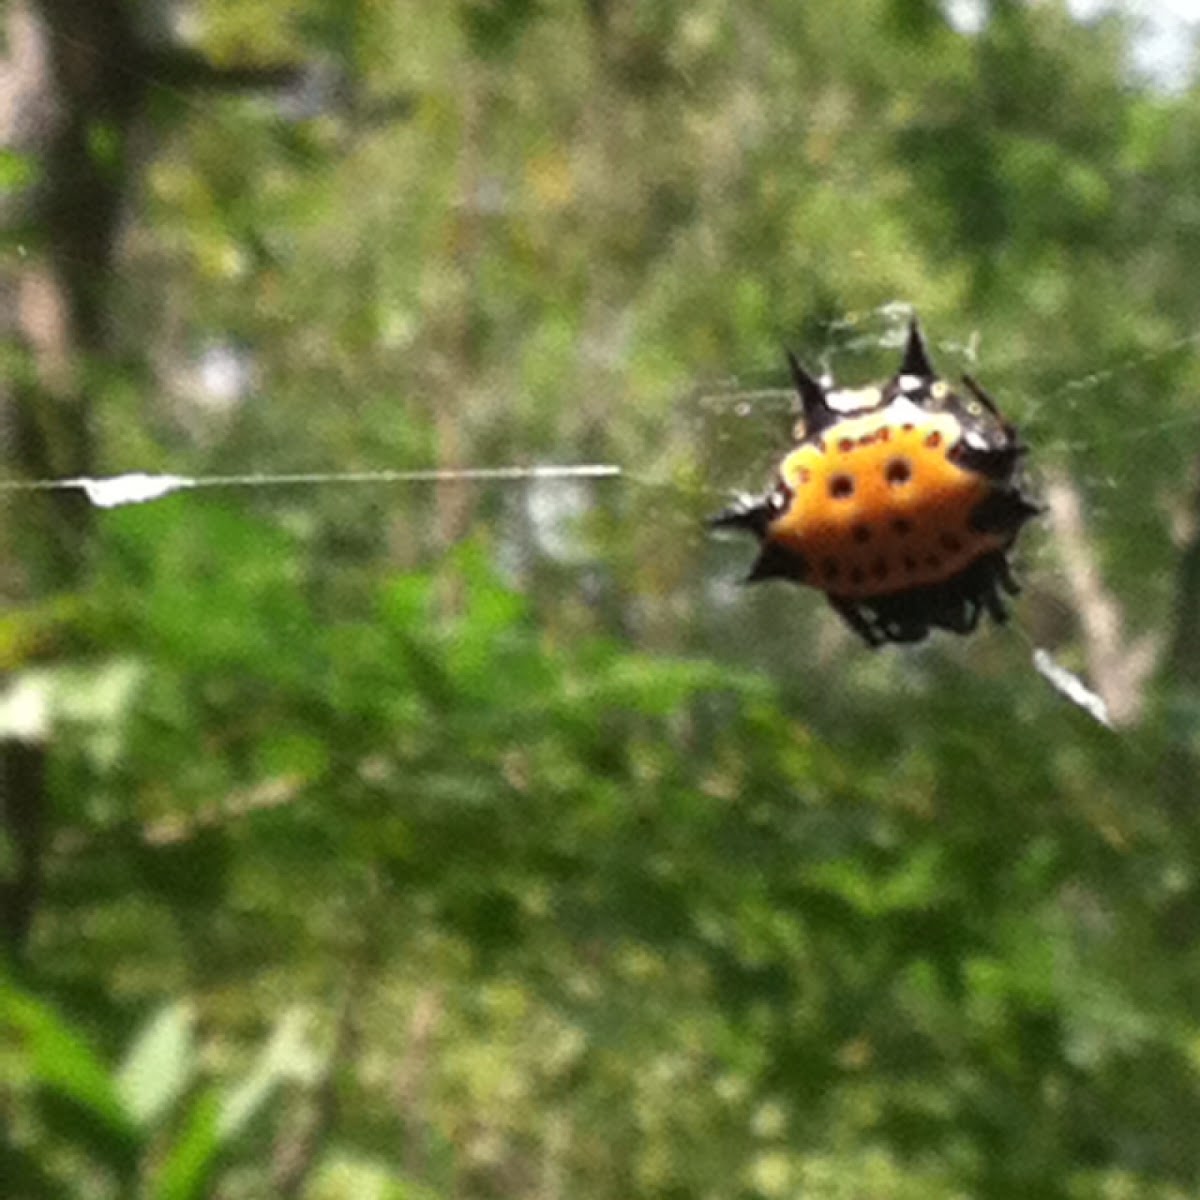 Spiny backed orb weaver